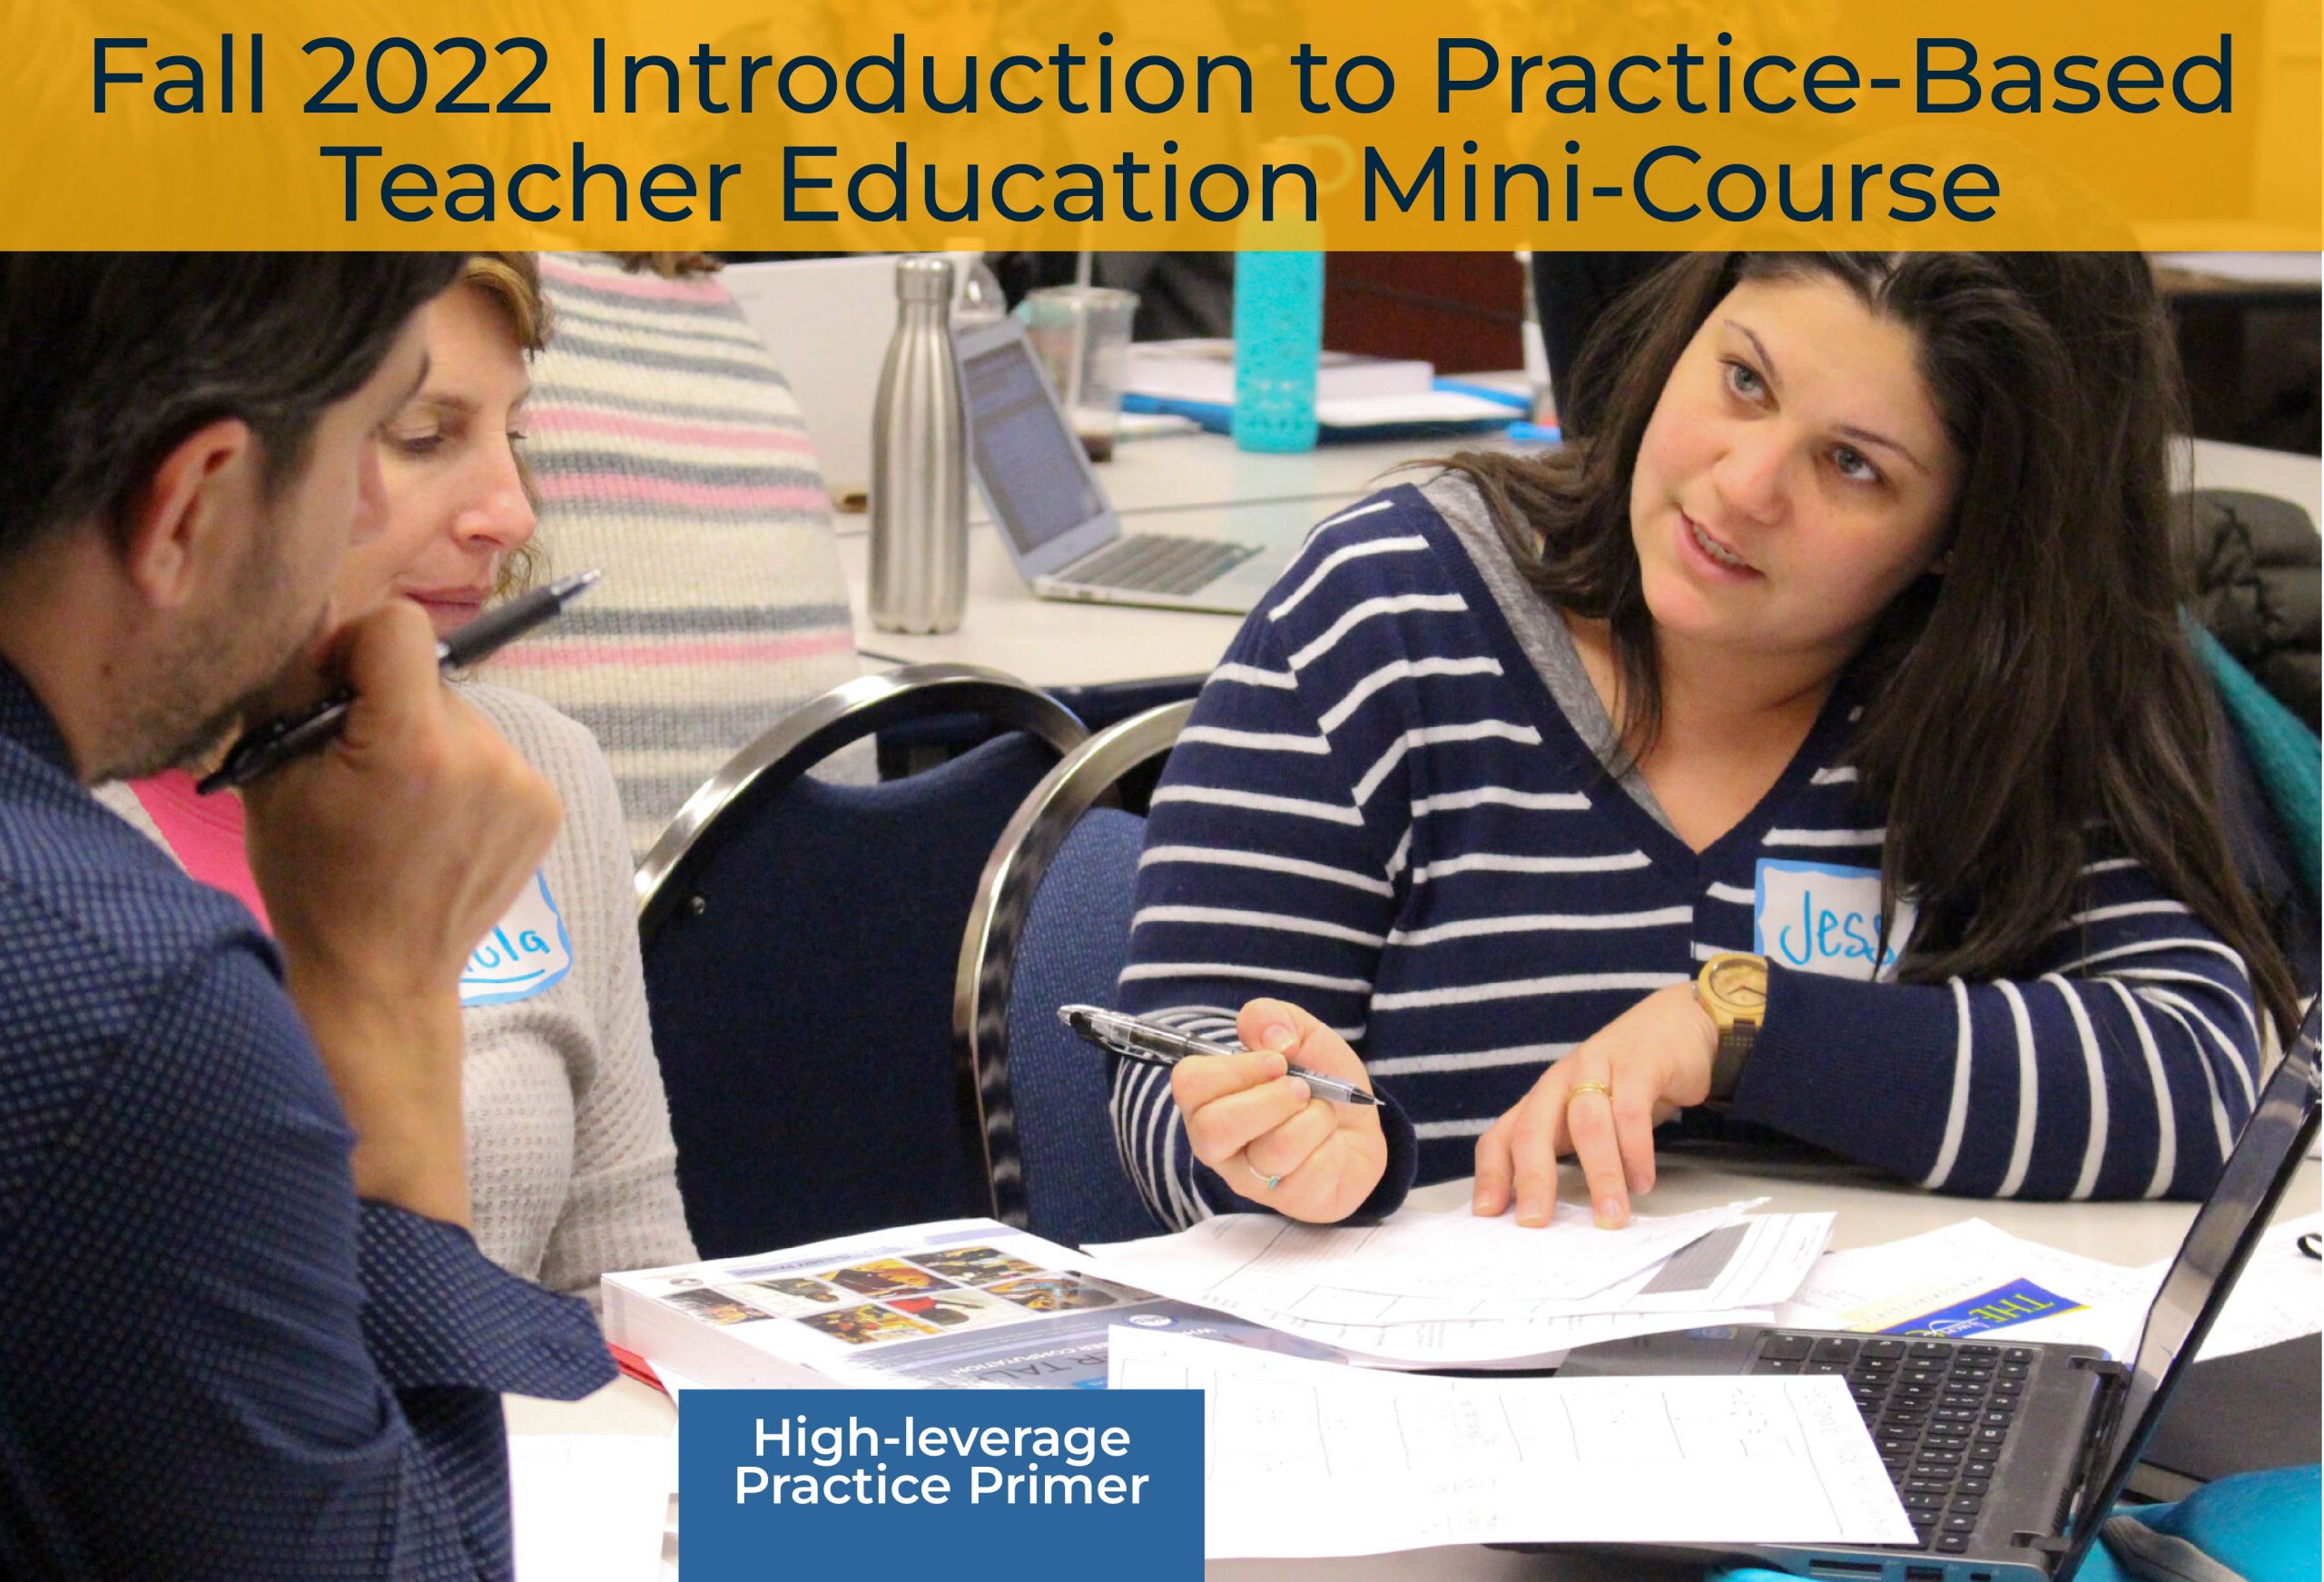 Introduction to Practice-Based Teacher Education Mini-Course